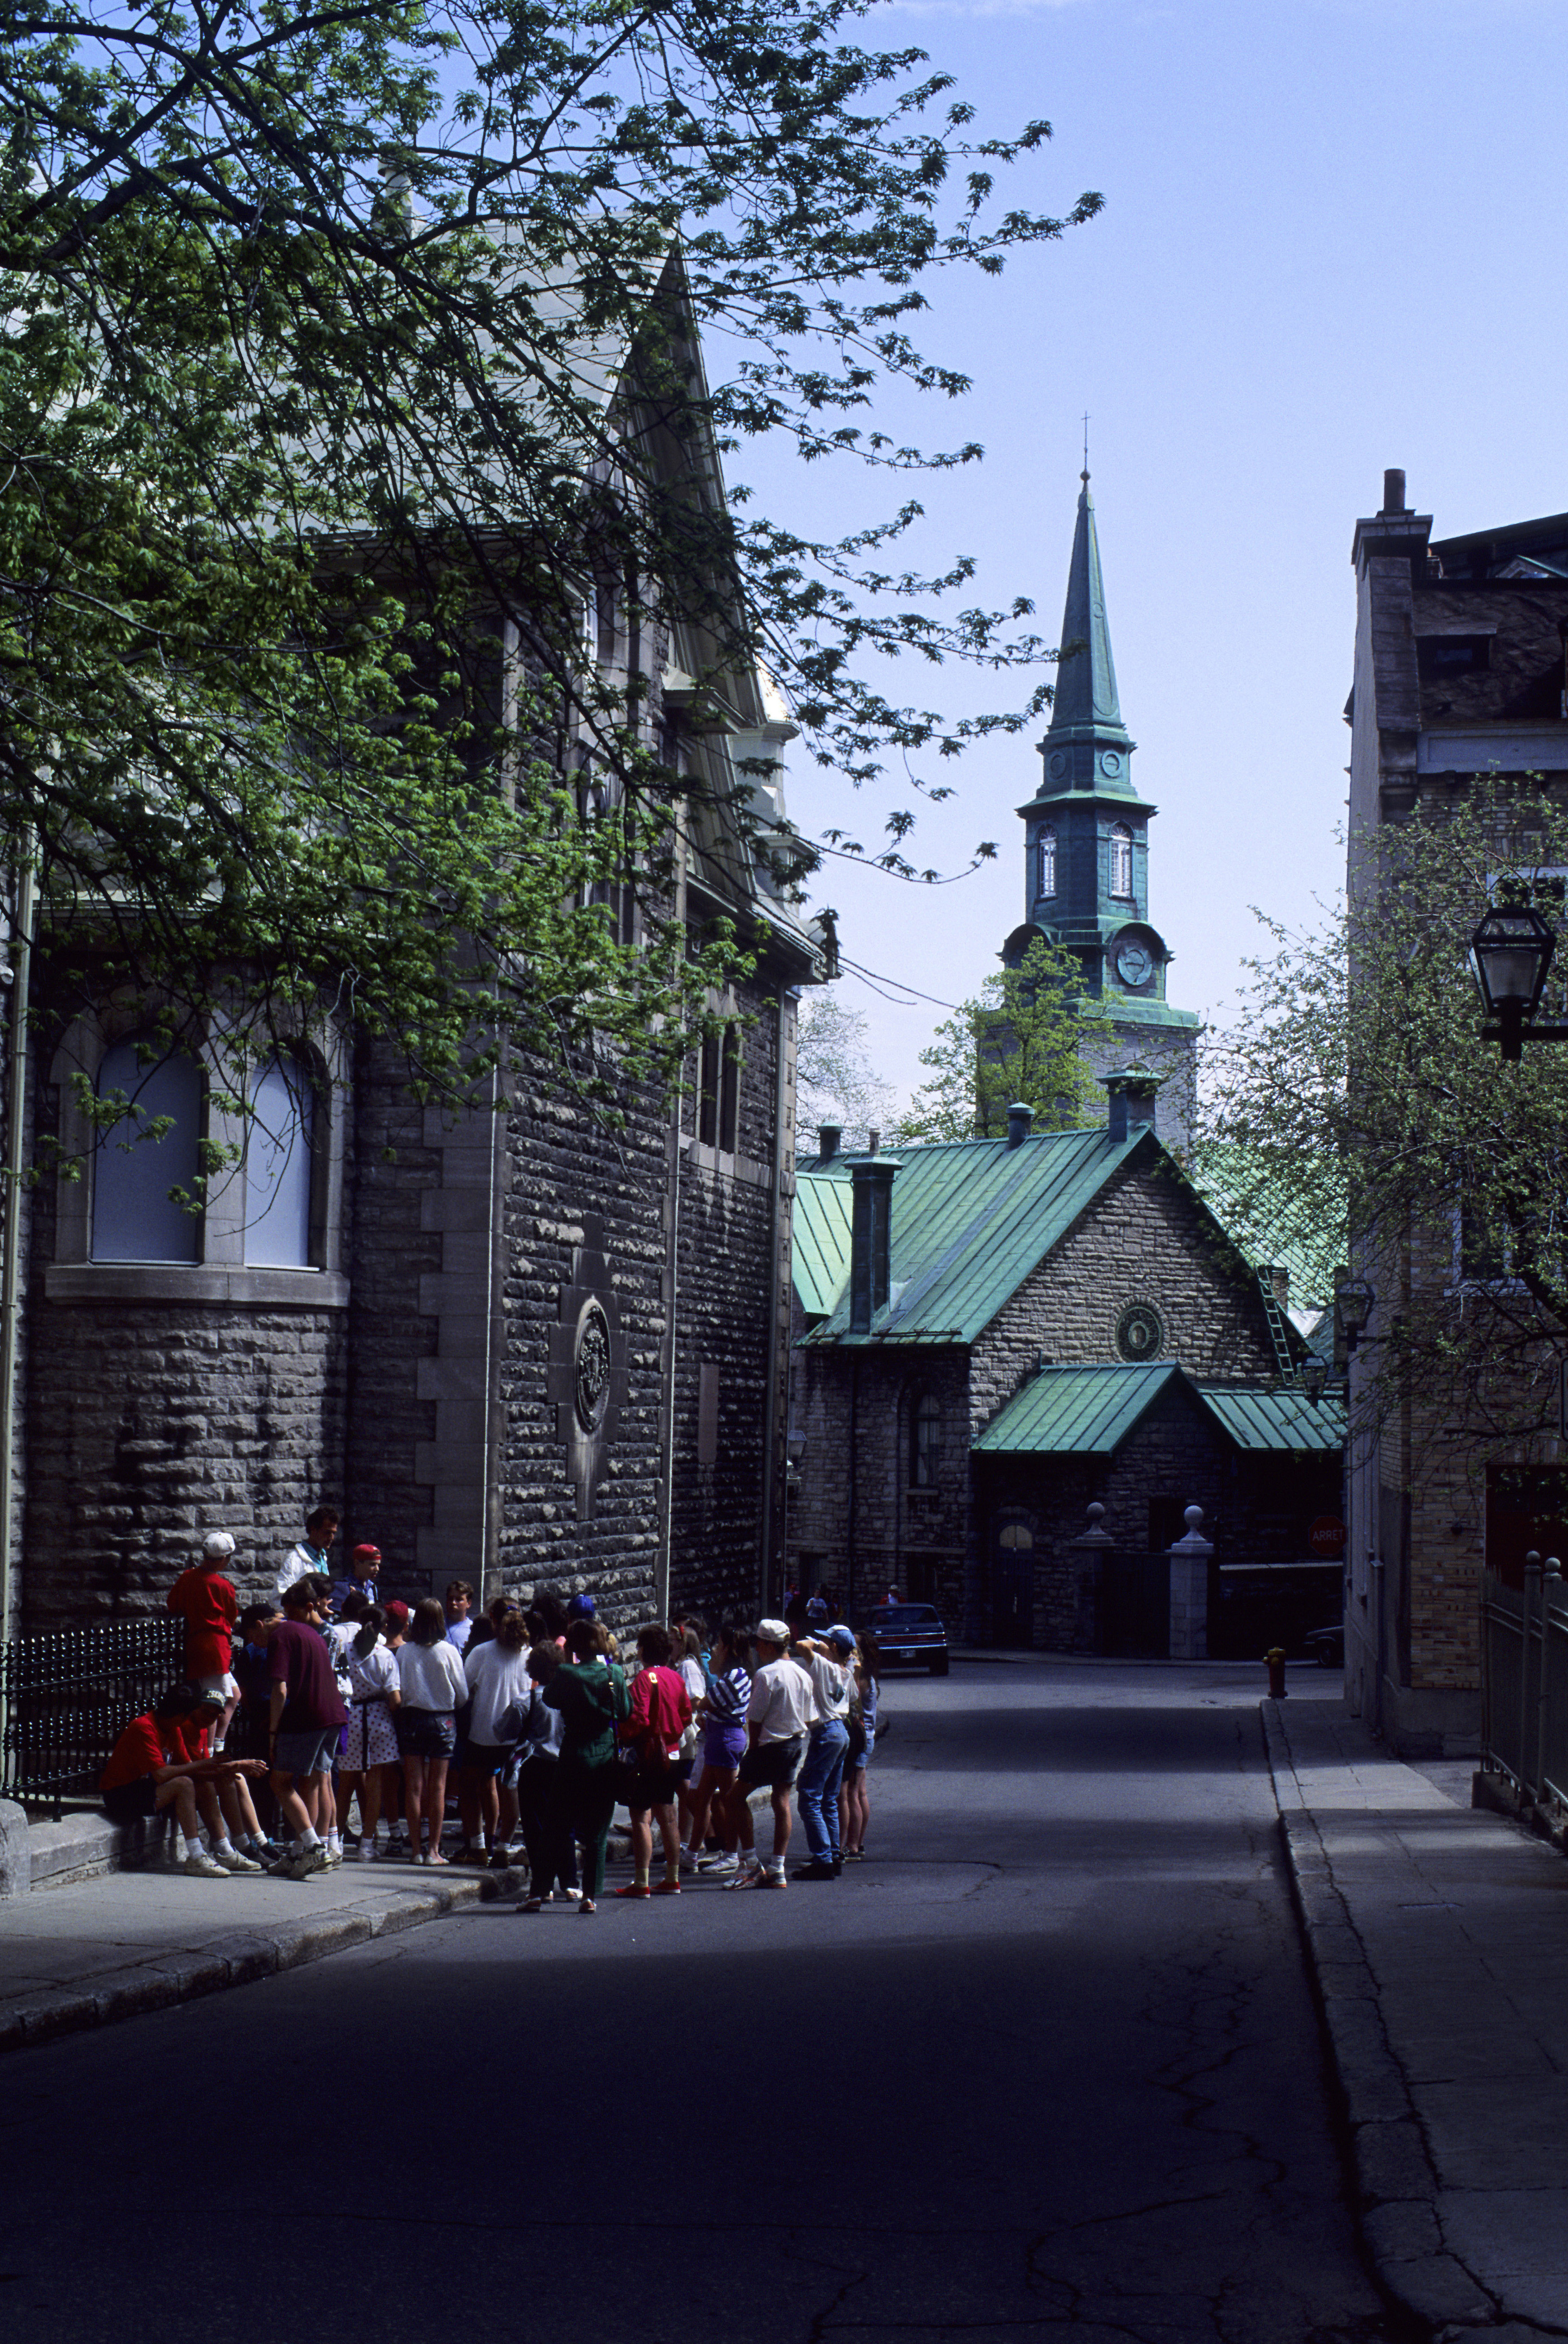 A cathedral can be seen down a street. A group of tourists huddles around it.